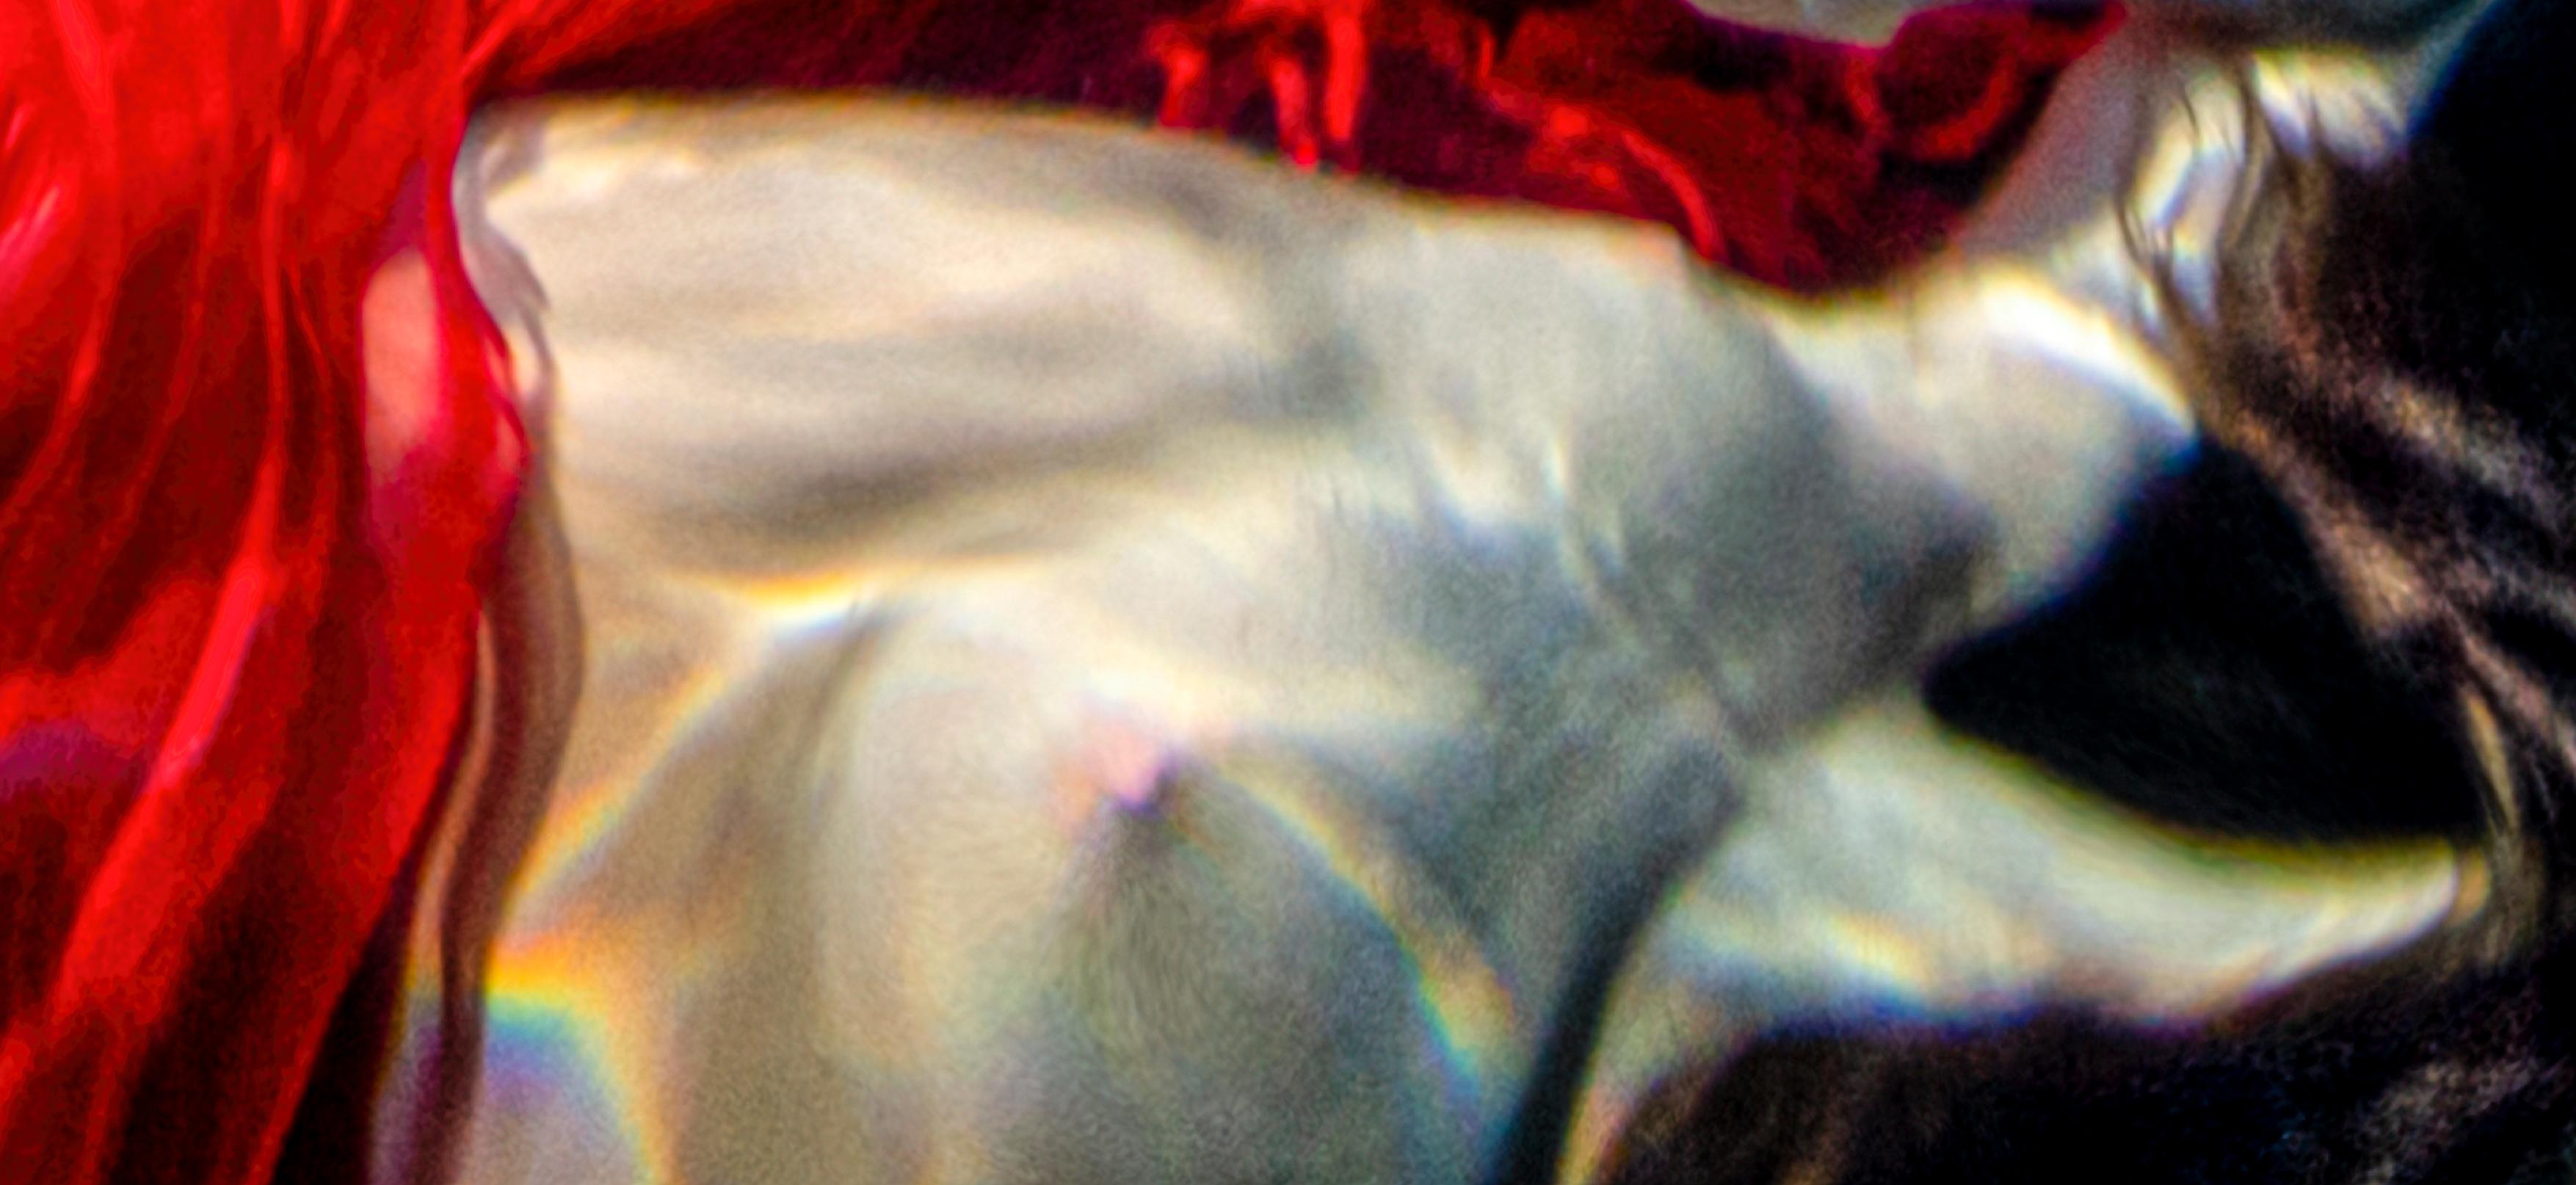 Her Own Universe - underwater nude photo - series REFLECTIONS - 14x24